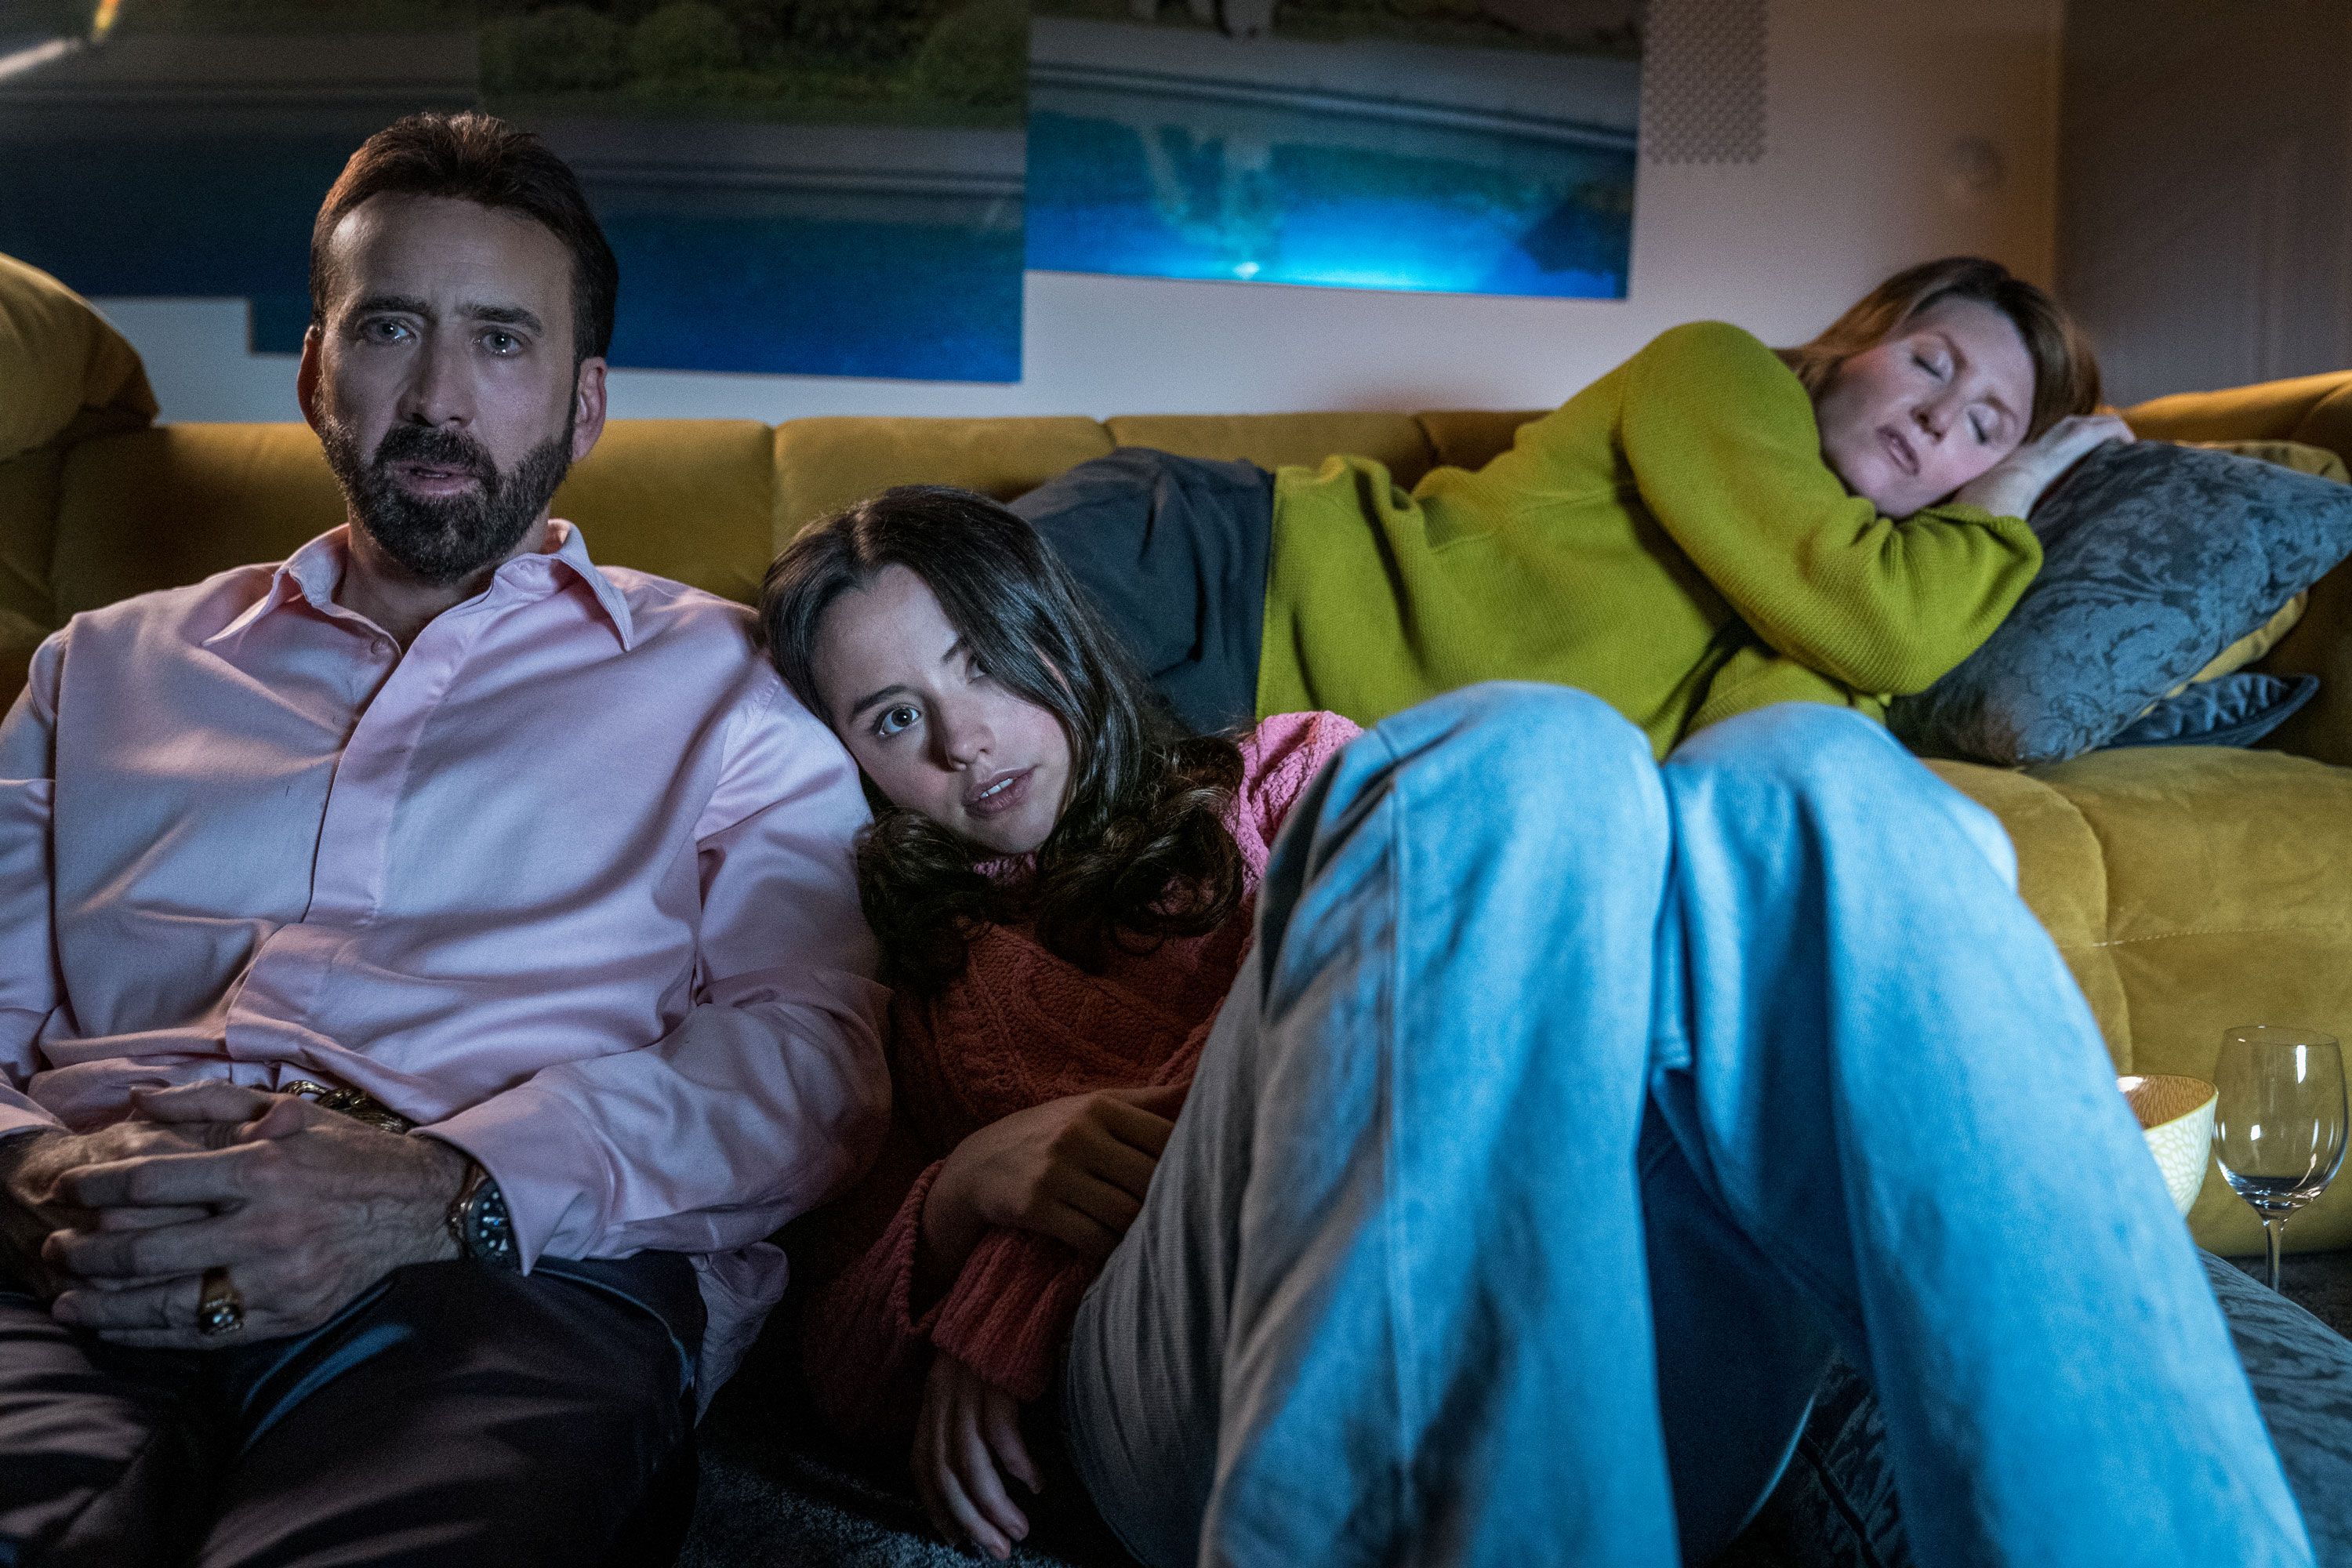 Nicolas Cage, Lily Sheen and Sharon Horgan in The Unbearable Weight of Massive Talent